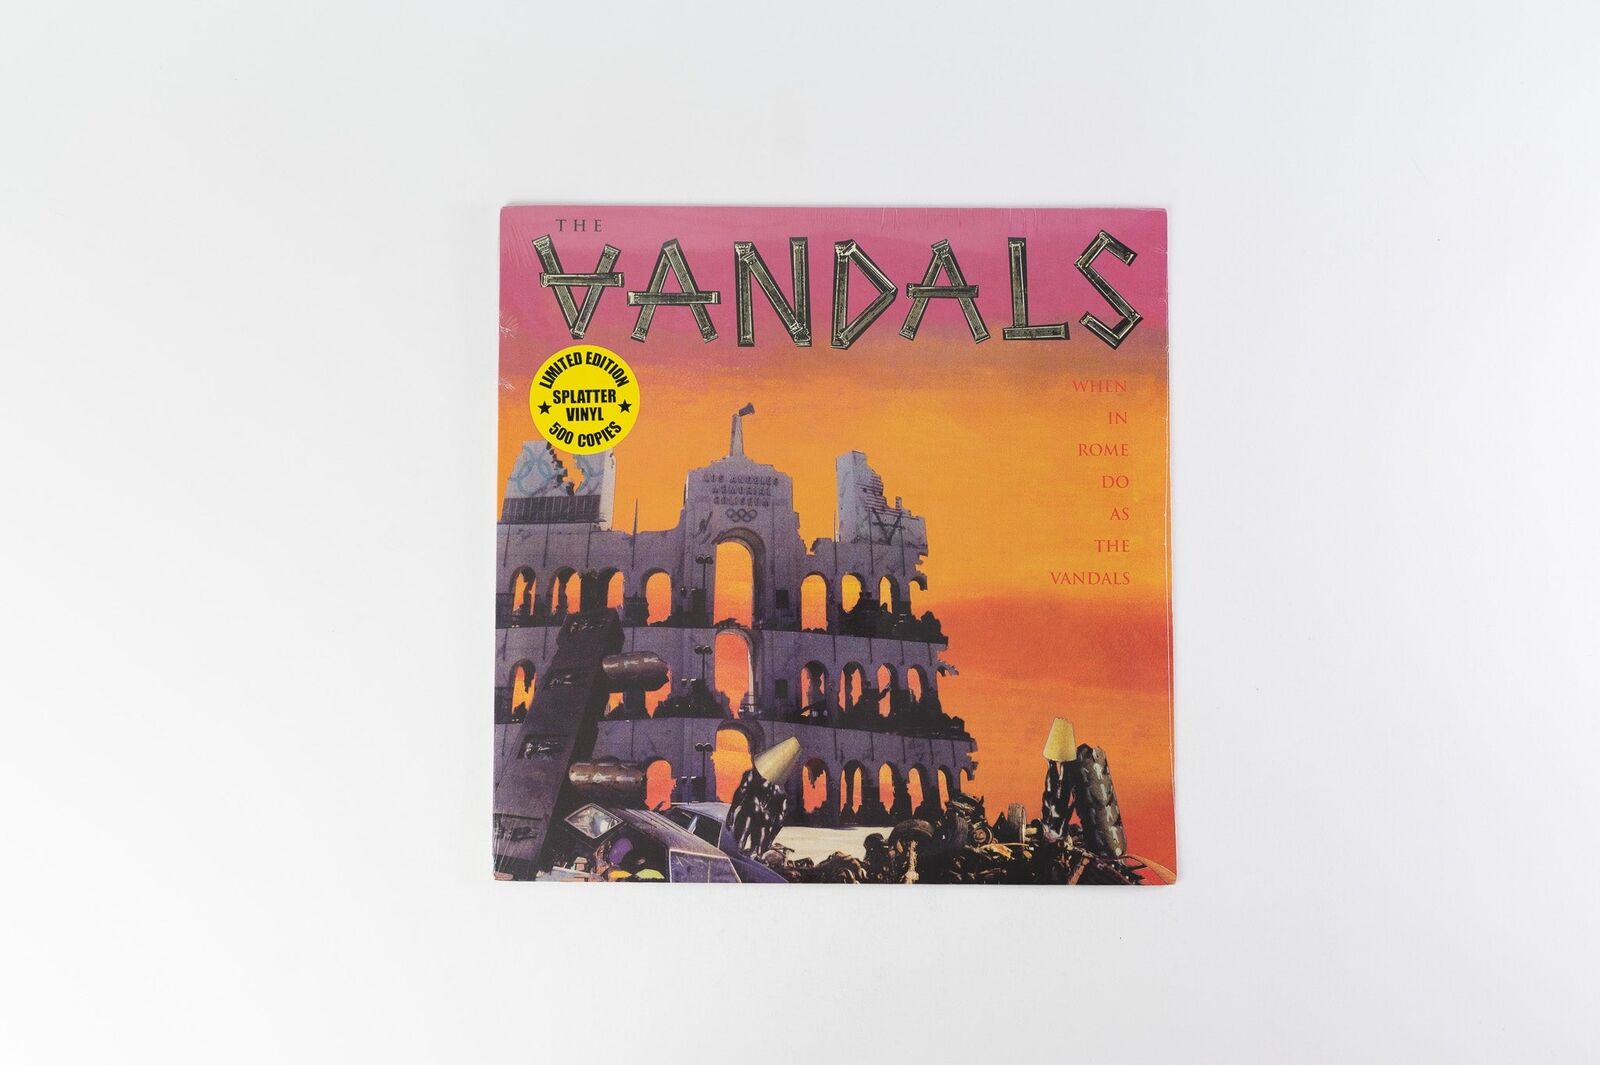 When In Rome Do As The Vandals SEALED Reissue on Kung Fu Records Splatter Vinyl